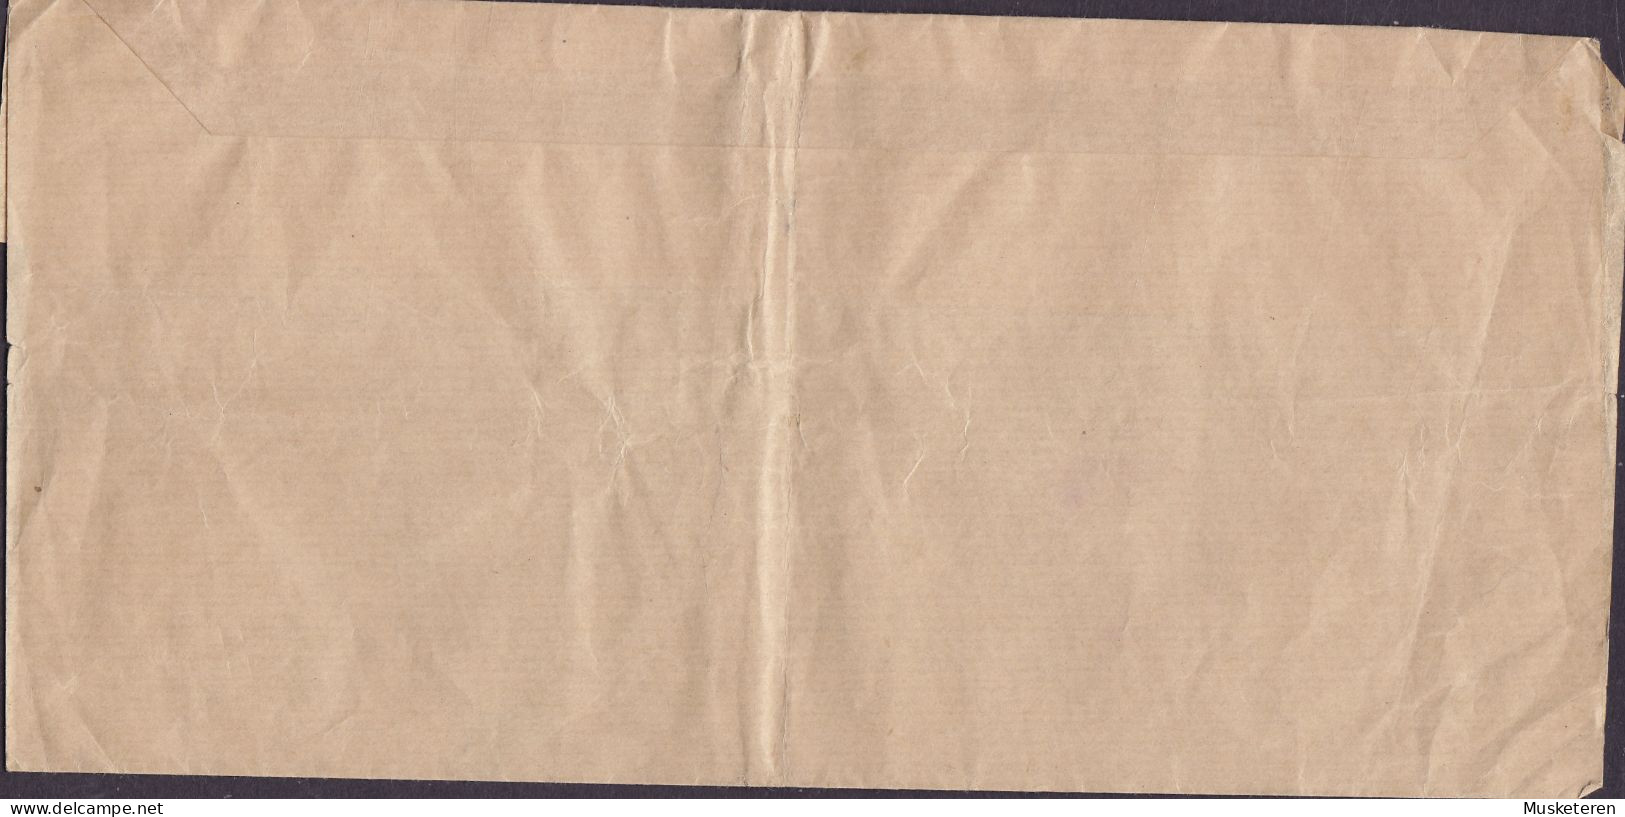 Great Britain Postal Stationery Ganzsache Wrapper Streifband GV PRIVATE Print THE STOCK EXCHANGE DAILY LIST, LONDON 1930 - Luftpost & Aerogramme